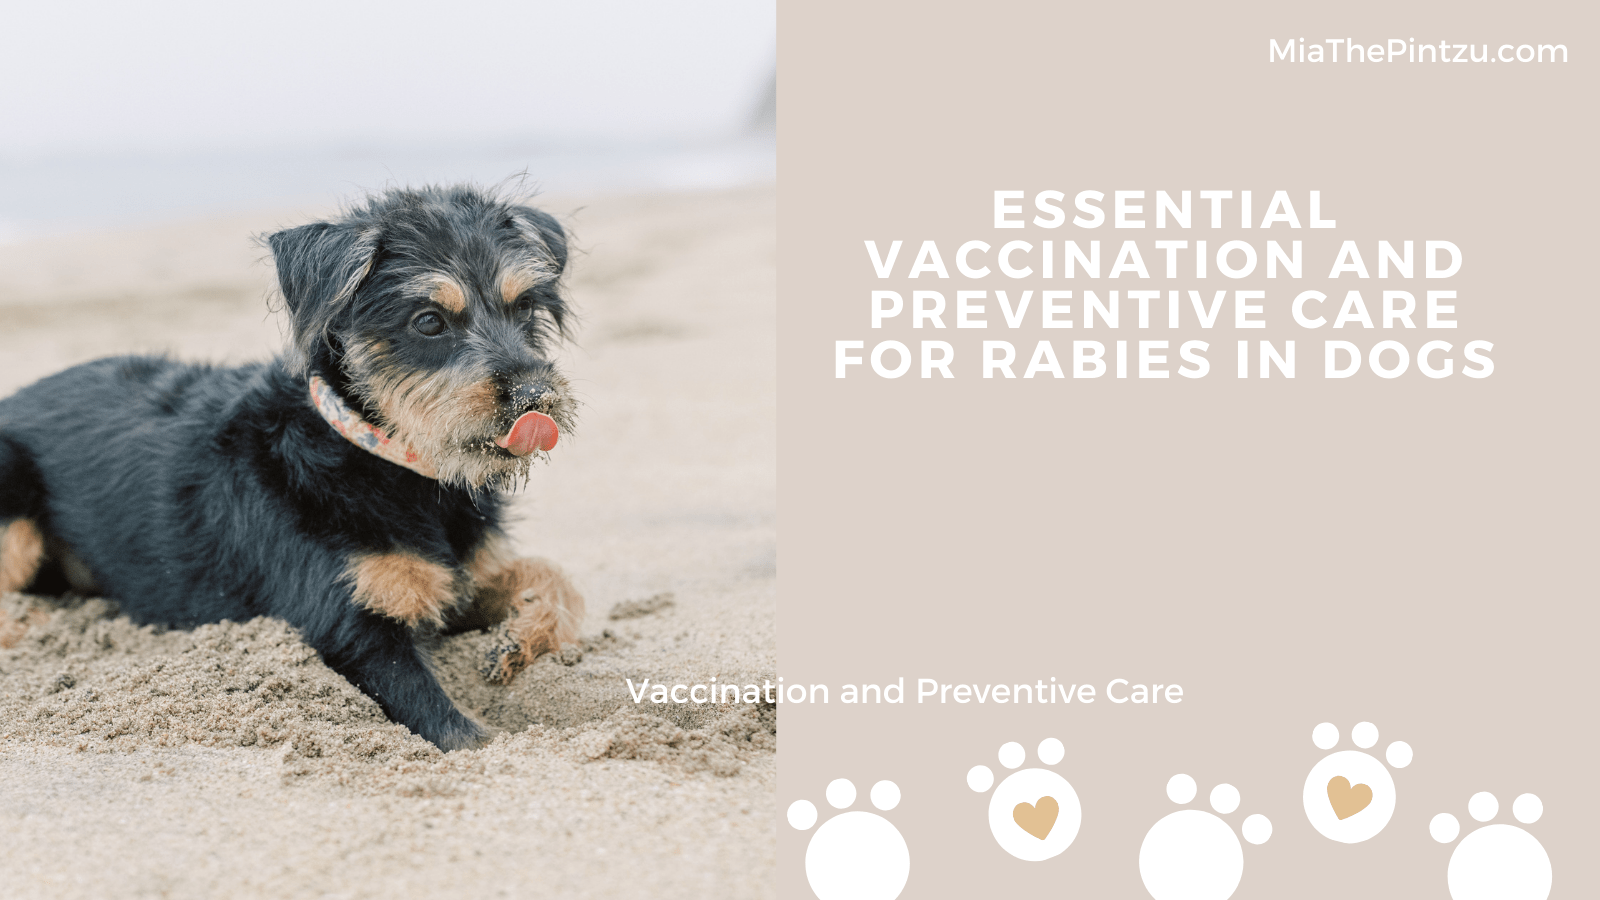 Essential Vaccination and Preventive Care for Rabies in Dogs